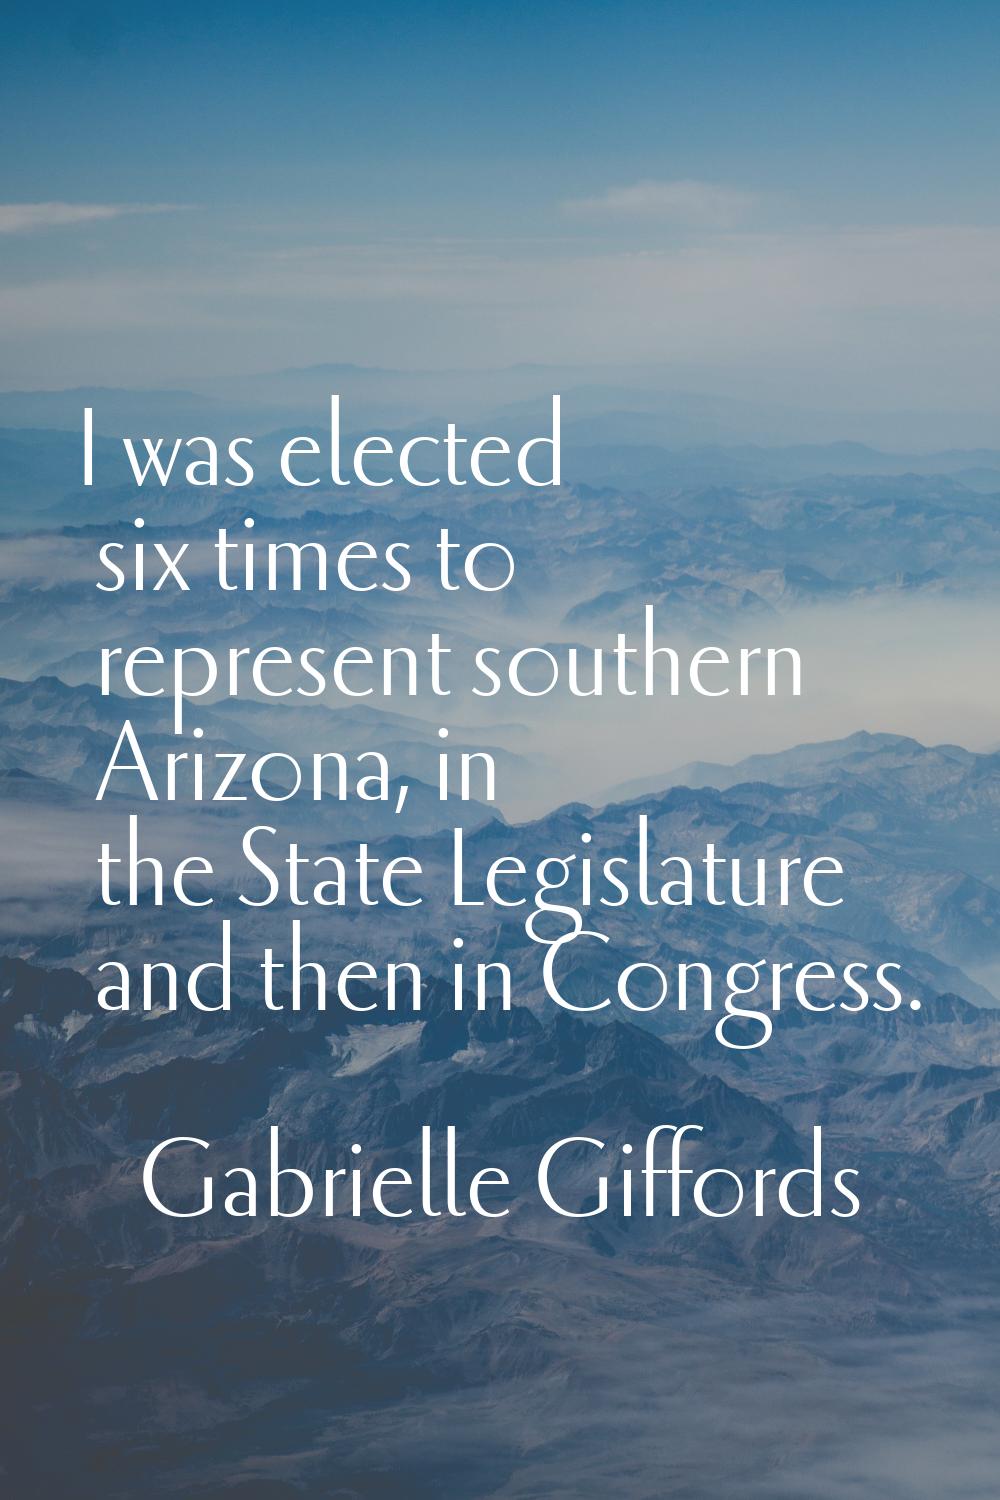 I was elected six times to represent southern Arizona, in the State Legislature and then in Congres